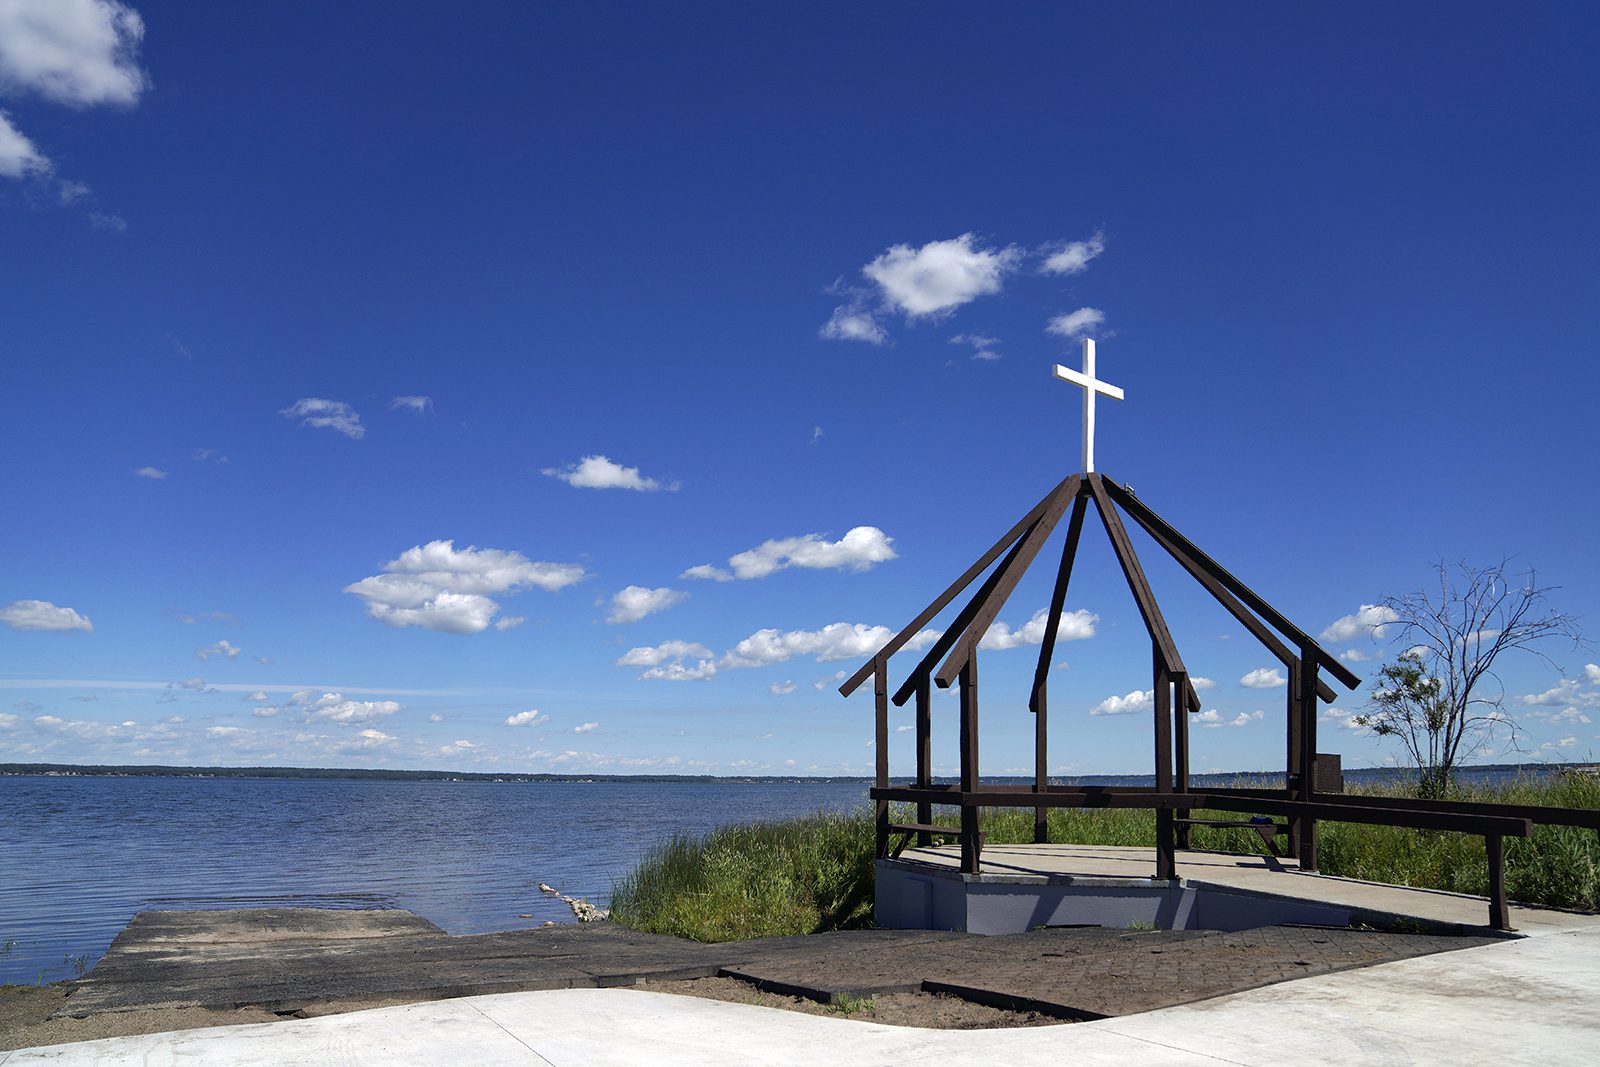 The Lac Ste. Anne pilgrimage site in Alberta, Canada, on Wednesday, July 20, 2022. Pope Francis is scheduled to make a pilgrimage to the water during his visit to the Canadian province. (AP Photo/Jessie Wardarski)